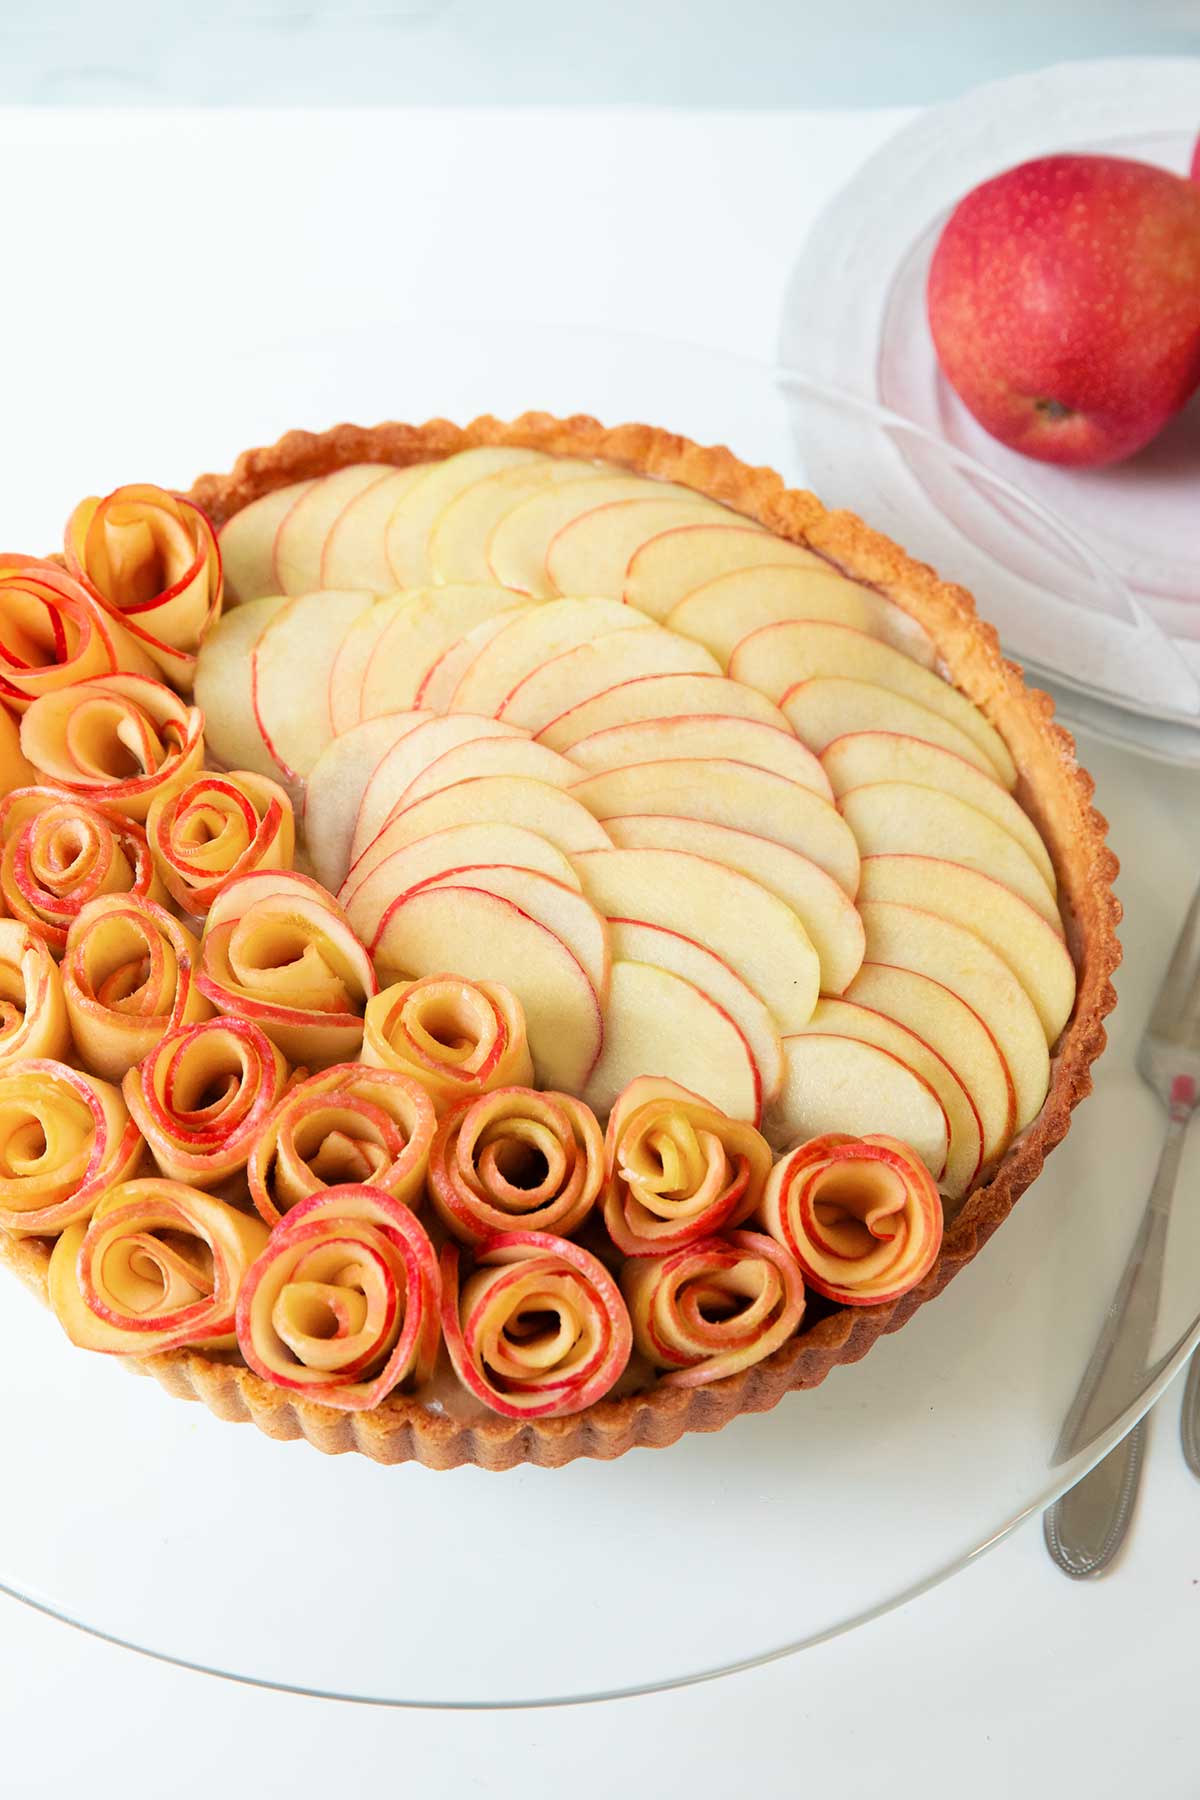 A apple rose tart on a glass cake stand.